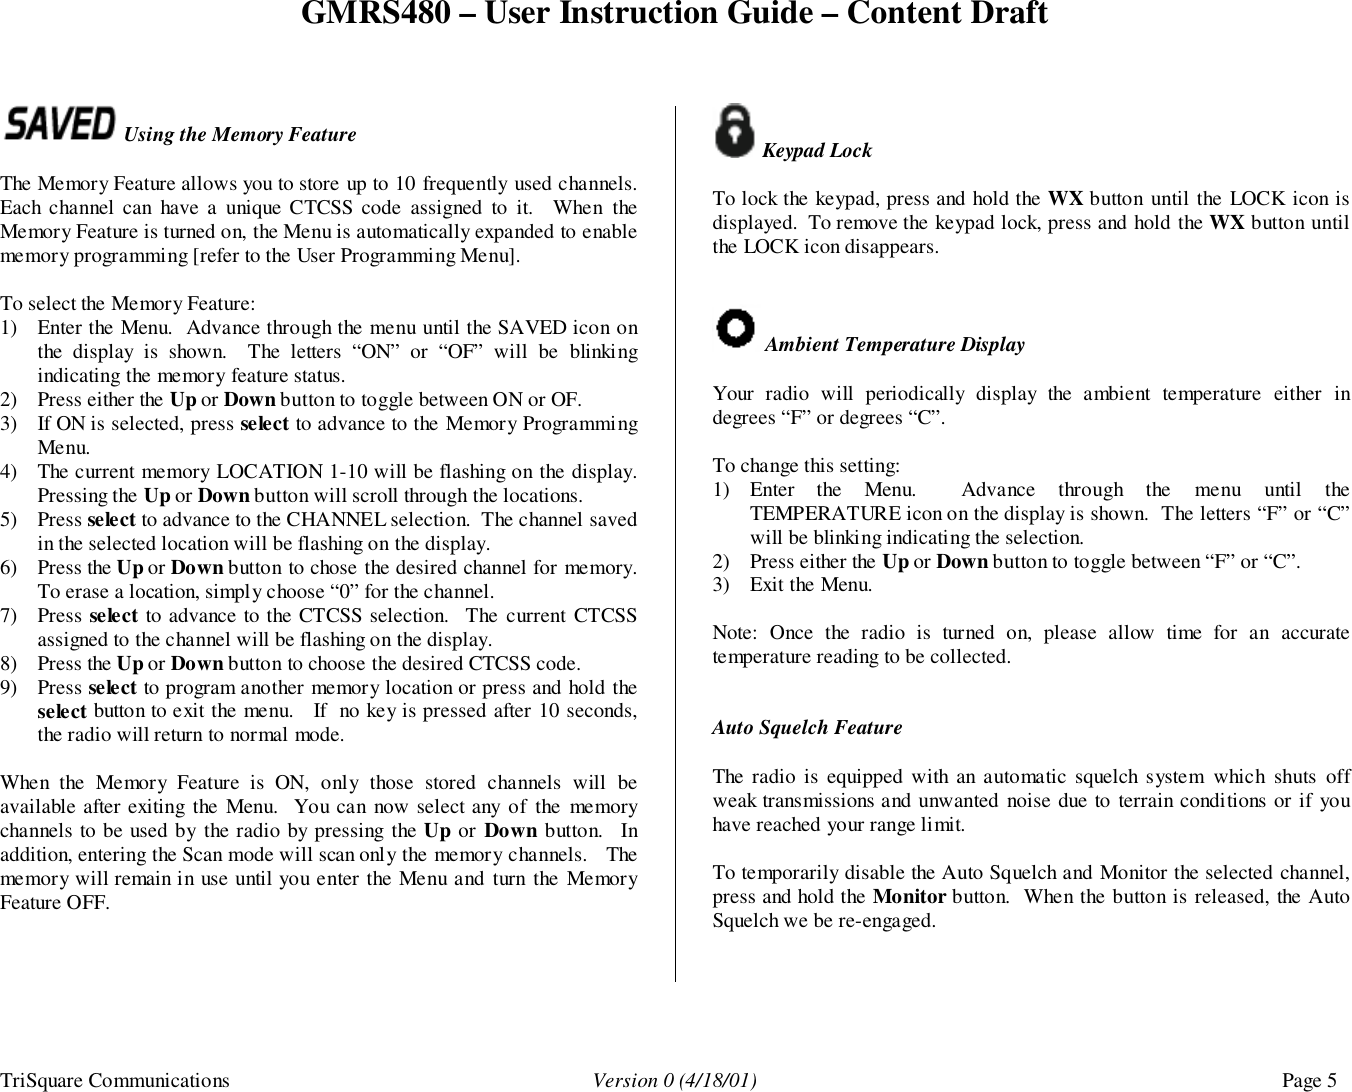 GMRS480 – User Instruction Guide – Content DraftTriSquare Communications Version 0 (4/18/01) Page 5 Using the Memory FeatureThe Memory Feature allows you to store up to 10 frequently used channels.Each channel can have a unique CTCSS code assigned to it.  When theMemory Feature is turned on, the Menu is automatically expanded to enablememory programming [refer to the User Programming Menu].To select the Memory Feature:1) Enter the Menu.  Advance through the menu until the SAVED icon onthe display is shown.  The letters “ON” or “OF” will be blinkingindicating the memory feature status.2) Press either the Up or Down button to toggle between ON or OF.3) If ON is selected, press select to advance to the Memory ProgrammingMenu.4) The current memory LOCATION 1-10 will be flashing on the display.Pressing the Up or Down button will scroll through the locations.5) Press select to advance to the CHANNEL selection.  The channel savedin the selected location will be flashing on the display.6) Press the Up or Down button to chose the desired channel for memory.To erase a location, simply choose “0” for the channel.7) Press select to advance to the CTCSS selection.  The current CTCSSassigned to the channel will be flashing on the display.8) Press the Up or Down button to choose the desired CTCSS code.9) Press select to program another memory location or press and hold theselect button to exit the menu.   If  no key is pressed after 10 seconds,the radio will return to normal mode.When the Memory Feature is ON, only those stored channels will beavailable after exiting the Menu.  You can now select any of the memorychannels to be used by the radio by pressing the Up or Down button.  Inaddition, entering the Scan mode will scan only the memory channels.   Thememory will remain in use until you enter the Menu and turn the MemoryFeature OFF. Keypad LockTo lock the keypad, press and hold the WX button until the LOCK icon isdisplayed.  To remove the keypad lock, press and hold the WX button untilthe LOCK icon disappears. Ambient Temperature DisplayYour radio will periodically display the ambient temperature either indegrees “F” or degrees “C”.To change this setting:1) Enter the Menu.  Advance through the menu until theTEMPERATURE icon on the display is shown.  The letters “F” or “C”will be blinking indicating the selection.2) Press either the Up or Down button to toggle between “F” or “C”.3) Exit the Menu.Note: Once the radio is turned on, please allow time for an accuratetemperature reading to be collected.Auto Squelch FeatureThe radio is equipped with an automatic squelch system which shuts offweak transmissions and unwanted noise due to terrain conditions or if youhave reached your range limit.To temporarily disable the Auto Squelch and Monitor the selected channel,press and hold the Monitor button.  When the button is released, the AutoSquelch we be re-engaged.